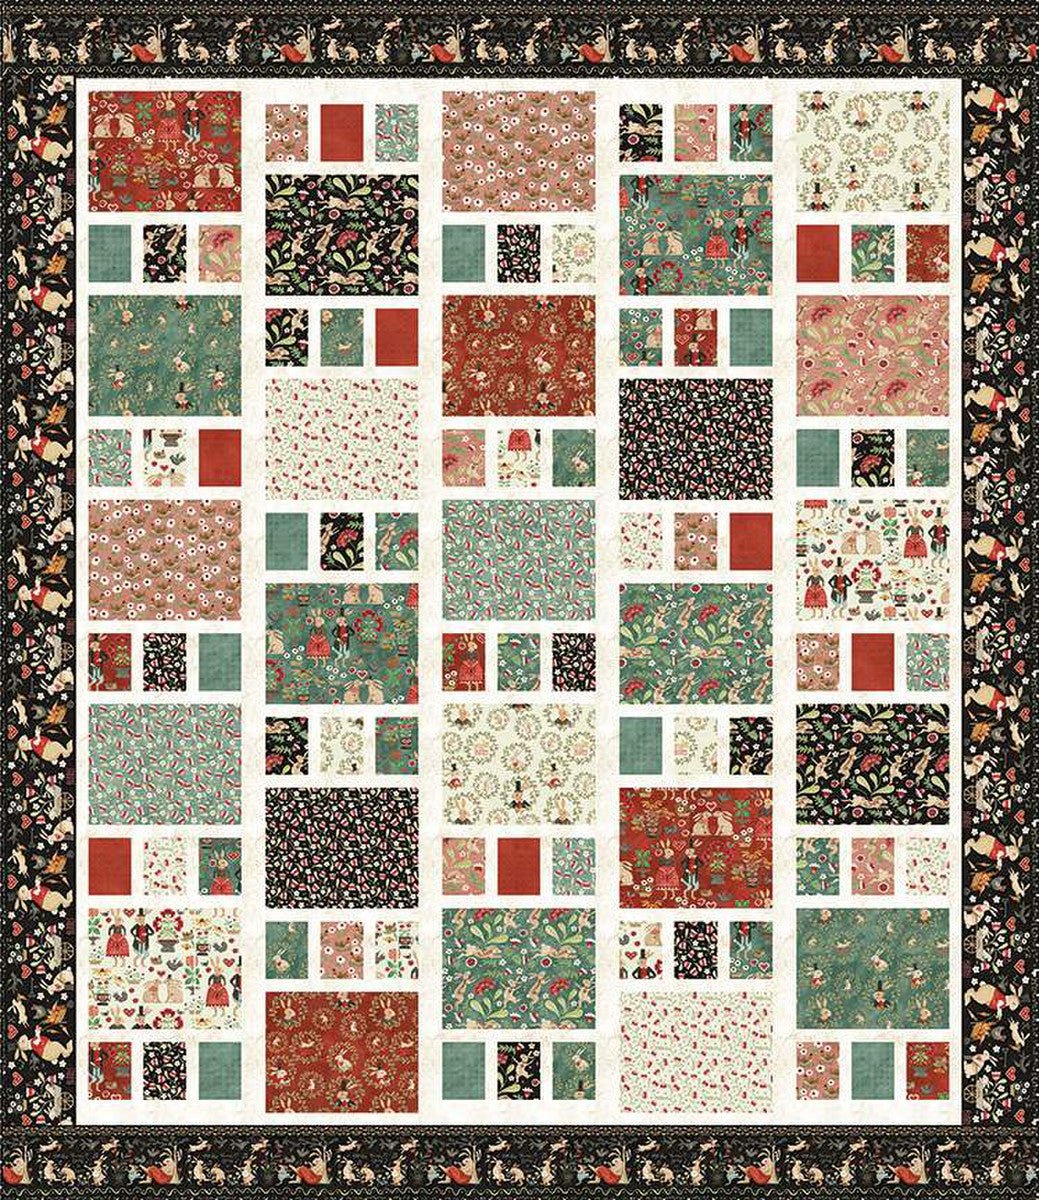 Craftsman Quilt Pattern by Amy Smart of Diary of A Quilter - Jammin Threads